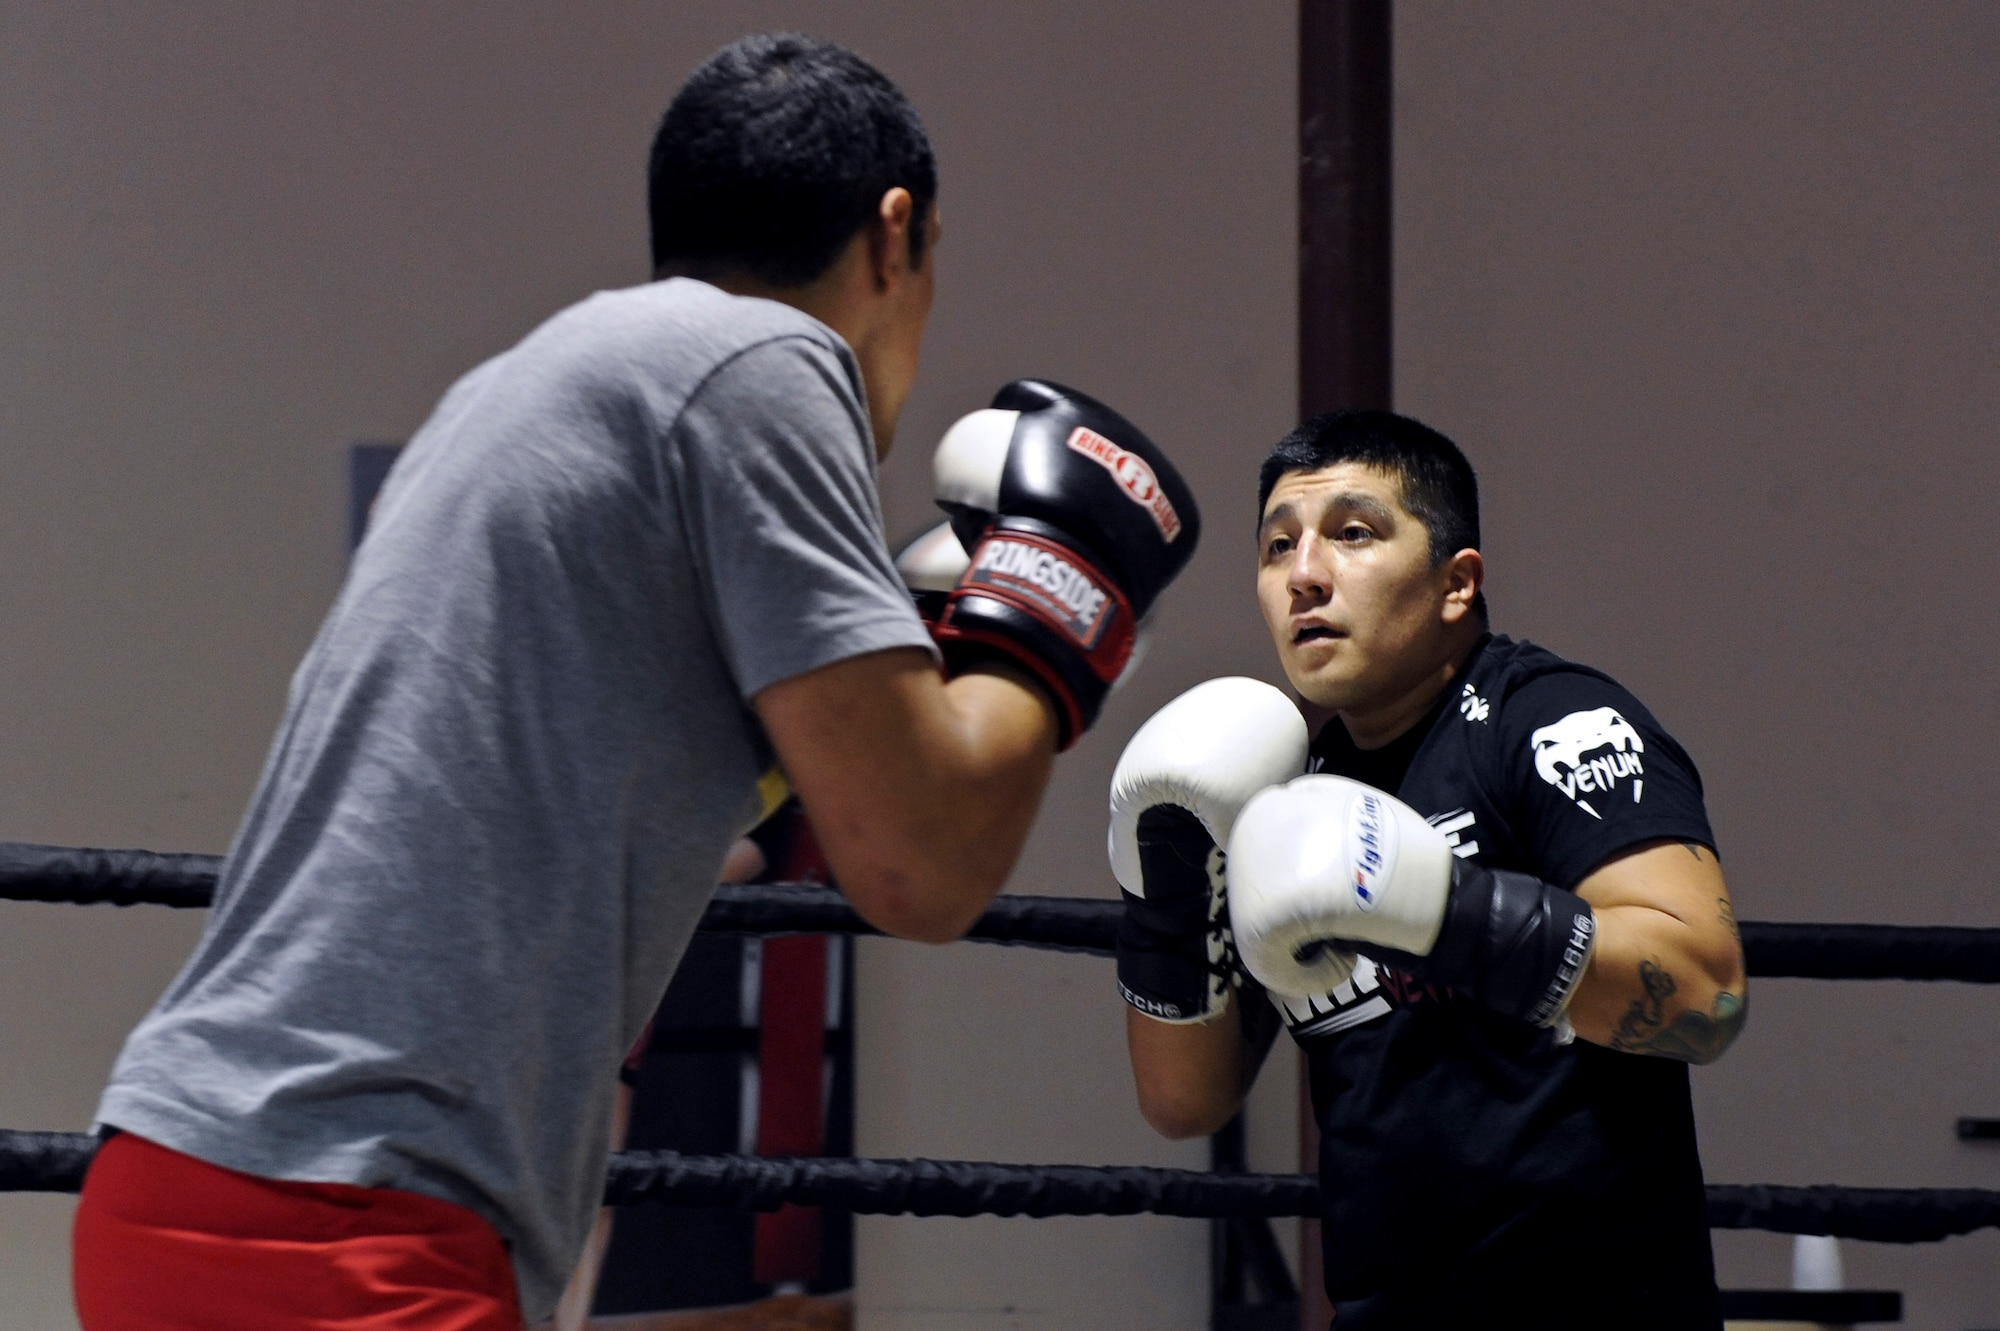 Airman 1st Class Justin Solorio, left, and Staff Sgt. Jeremy Caudillo, 2nd Force Support Squadron, begin their sparring session at a local mixed martial arts gym in Bossier City, La., Dec. 12. The two Airmen work at the Fitness Center on Barksdale Air Force Base, La., and enjoy training and competing in MMA competitions. Caudillo takes some of the exercises he learns from the MMA gym and uses them to help his fellow Airmen stay fit to fight. (U.S. Air Force photo/Senior Airman Micaiah Anthony)